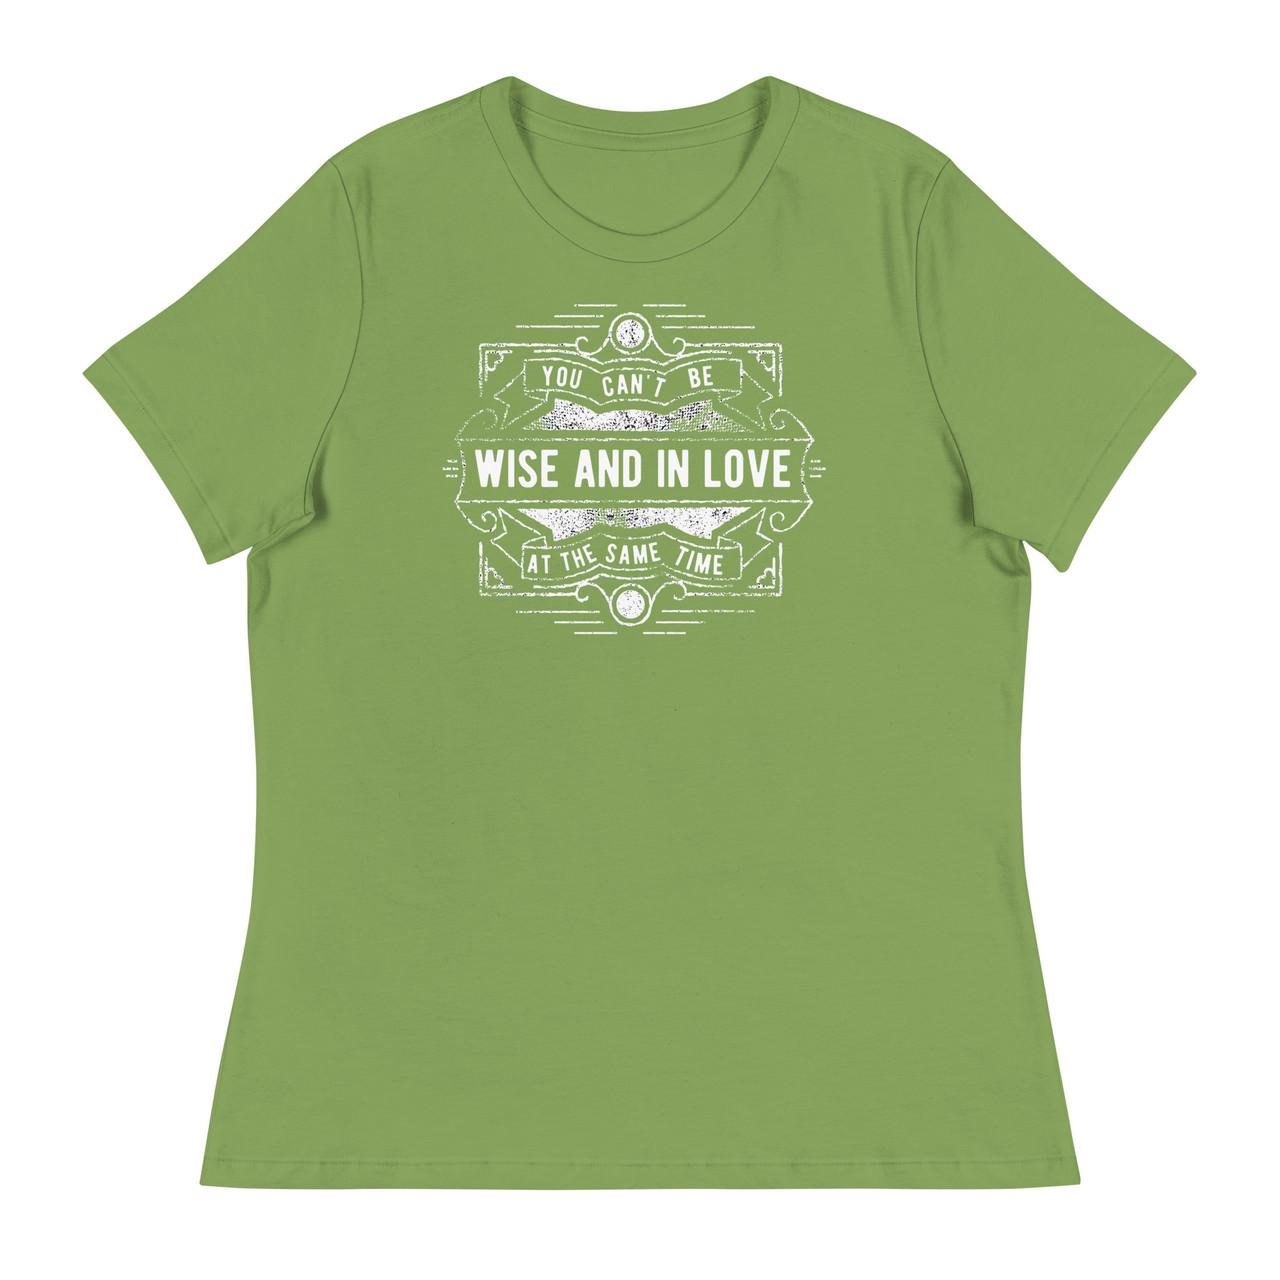 Wise And In Love Women's Relaxed T-Shirt - Bella + Canvas 6400 